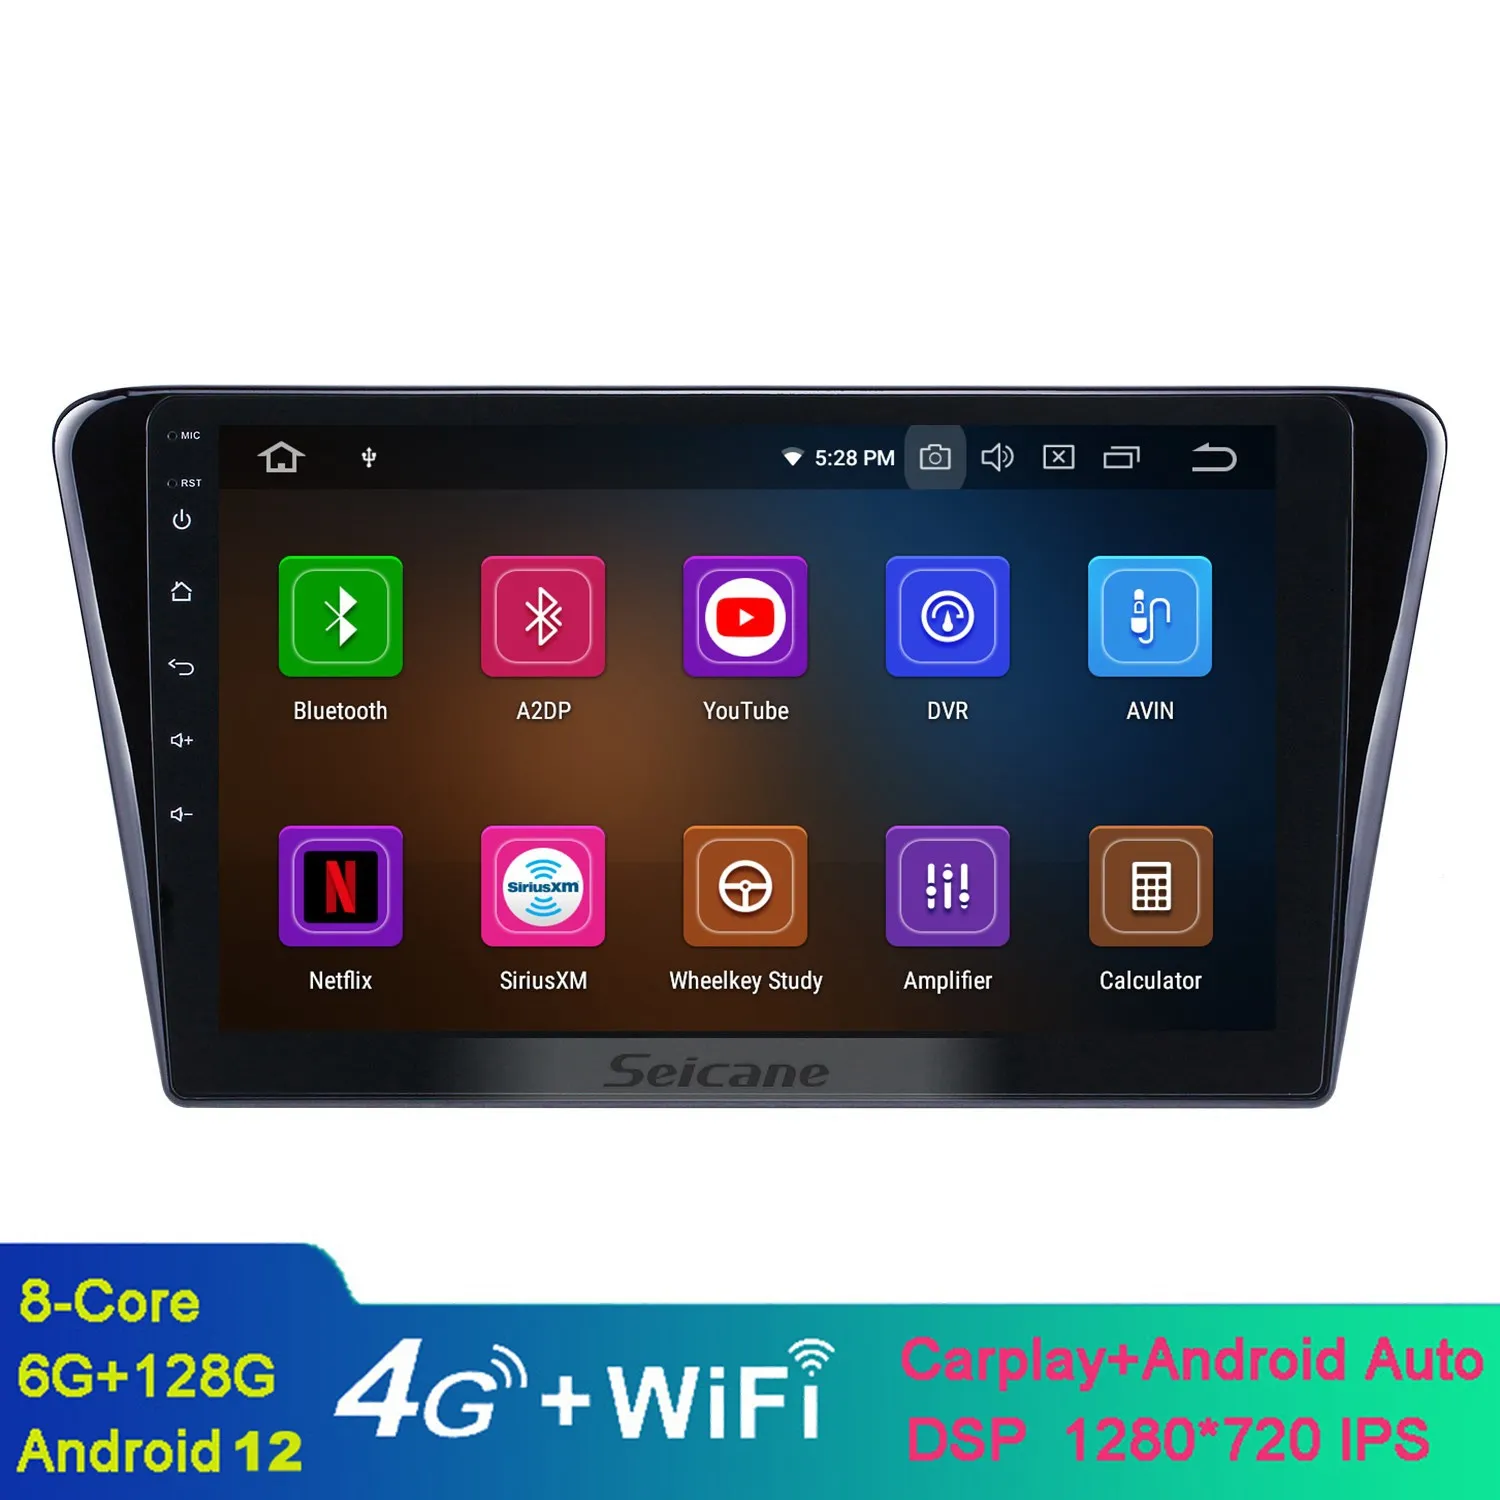 Car Video GPS System 10.1 Inch Android for 2014-Peugeot 408 with Bluetooth MUSIC WIFI Support TV Digital TPMS DVR OBD II